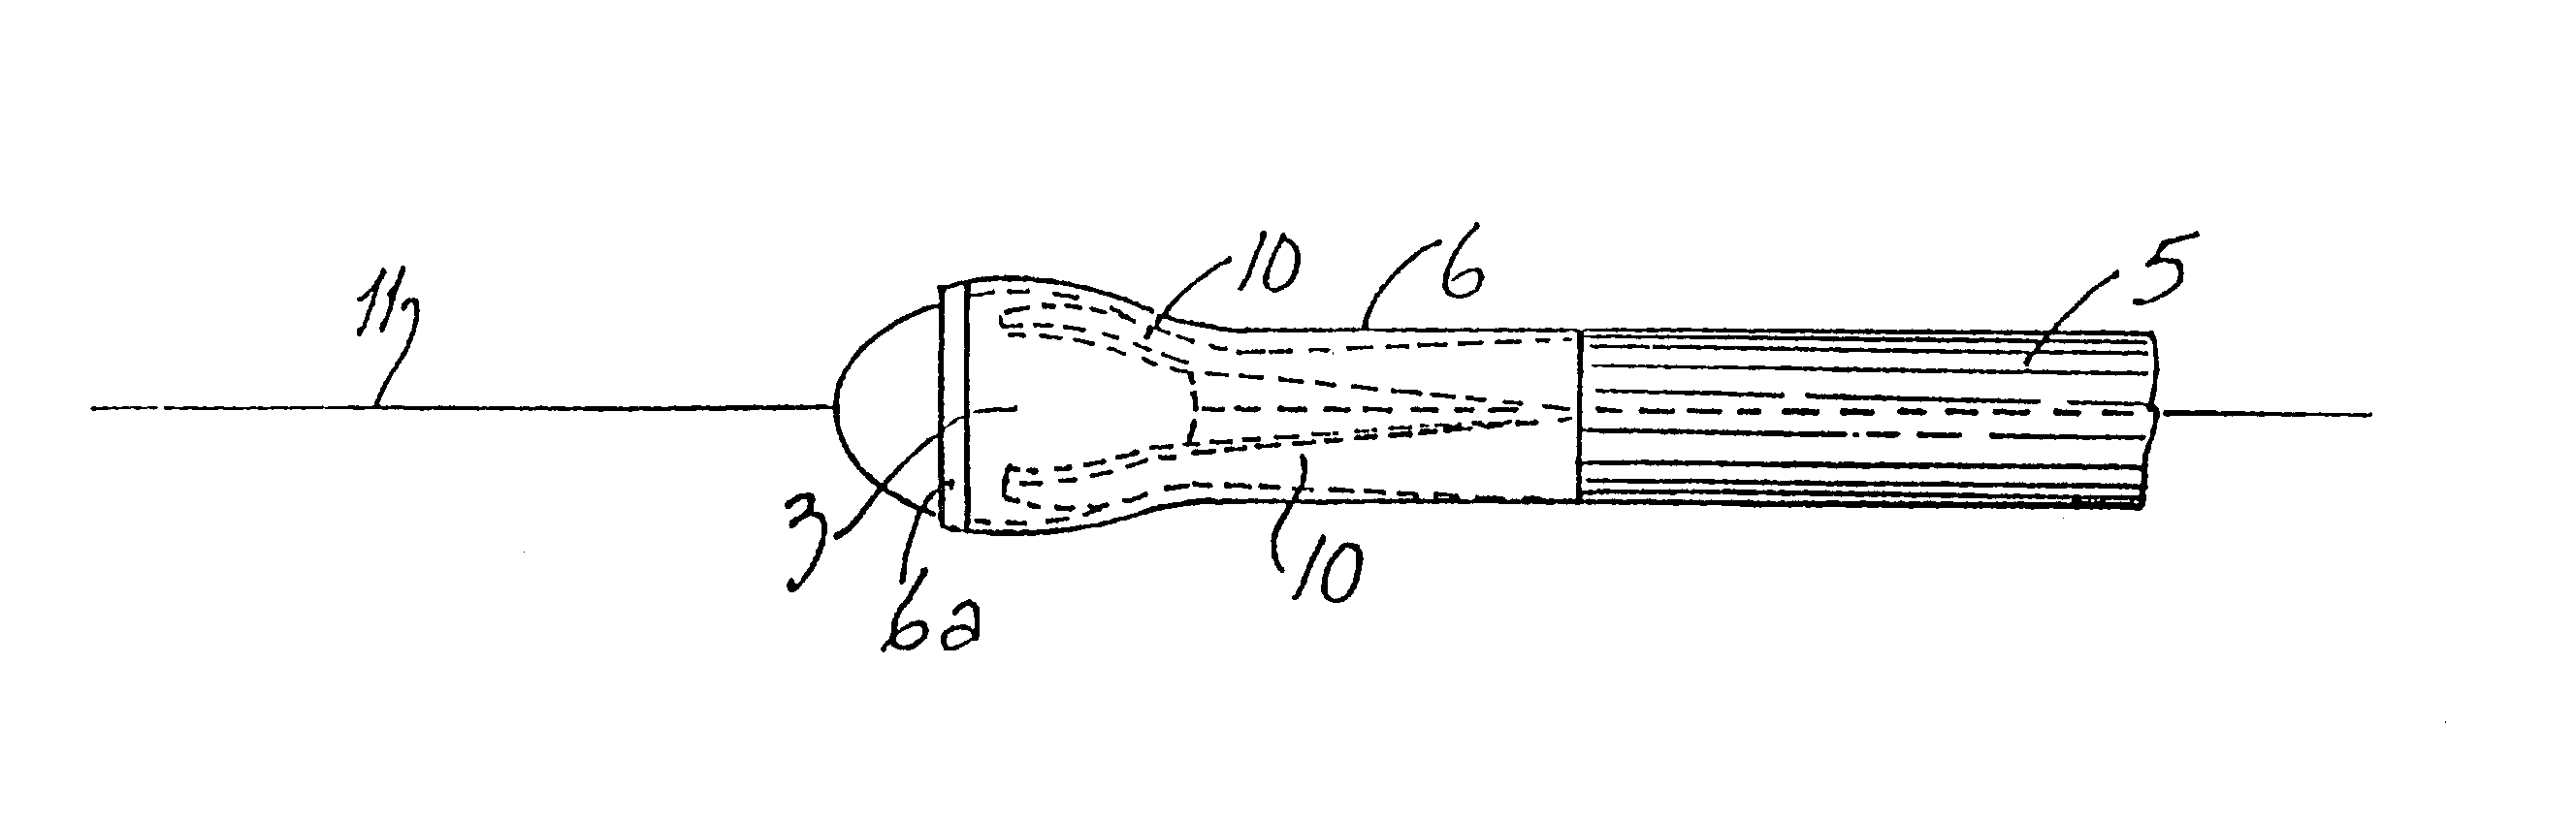 Catheter with an expandable end portion